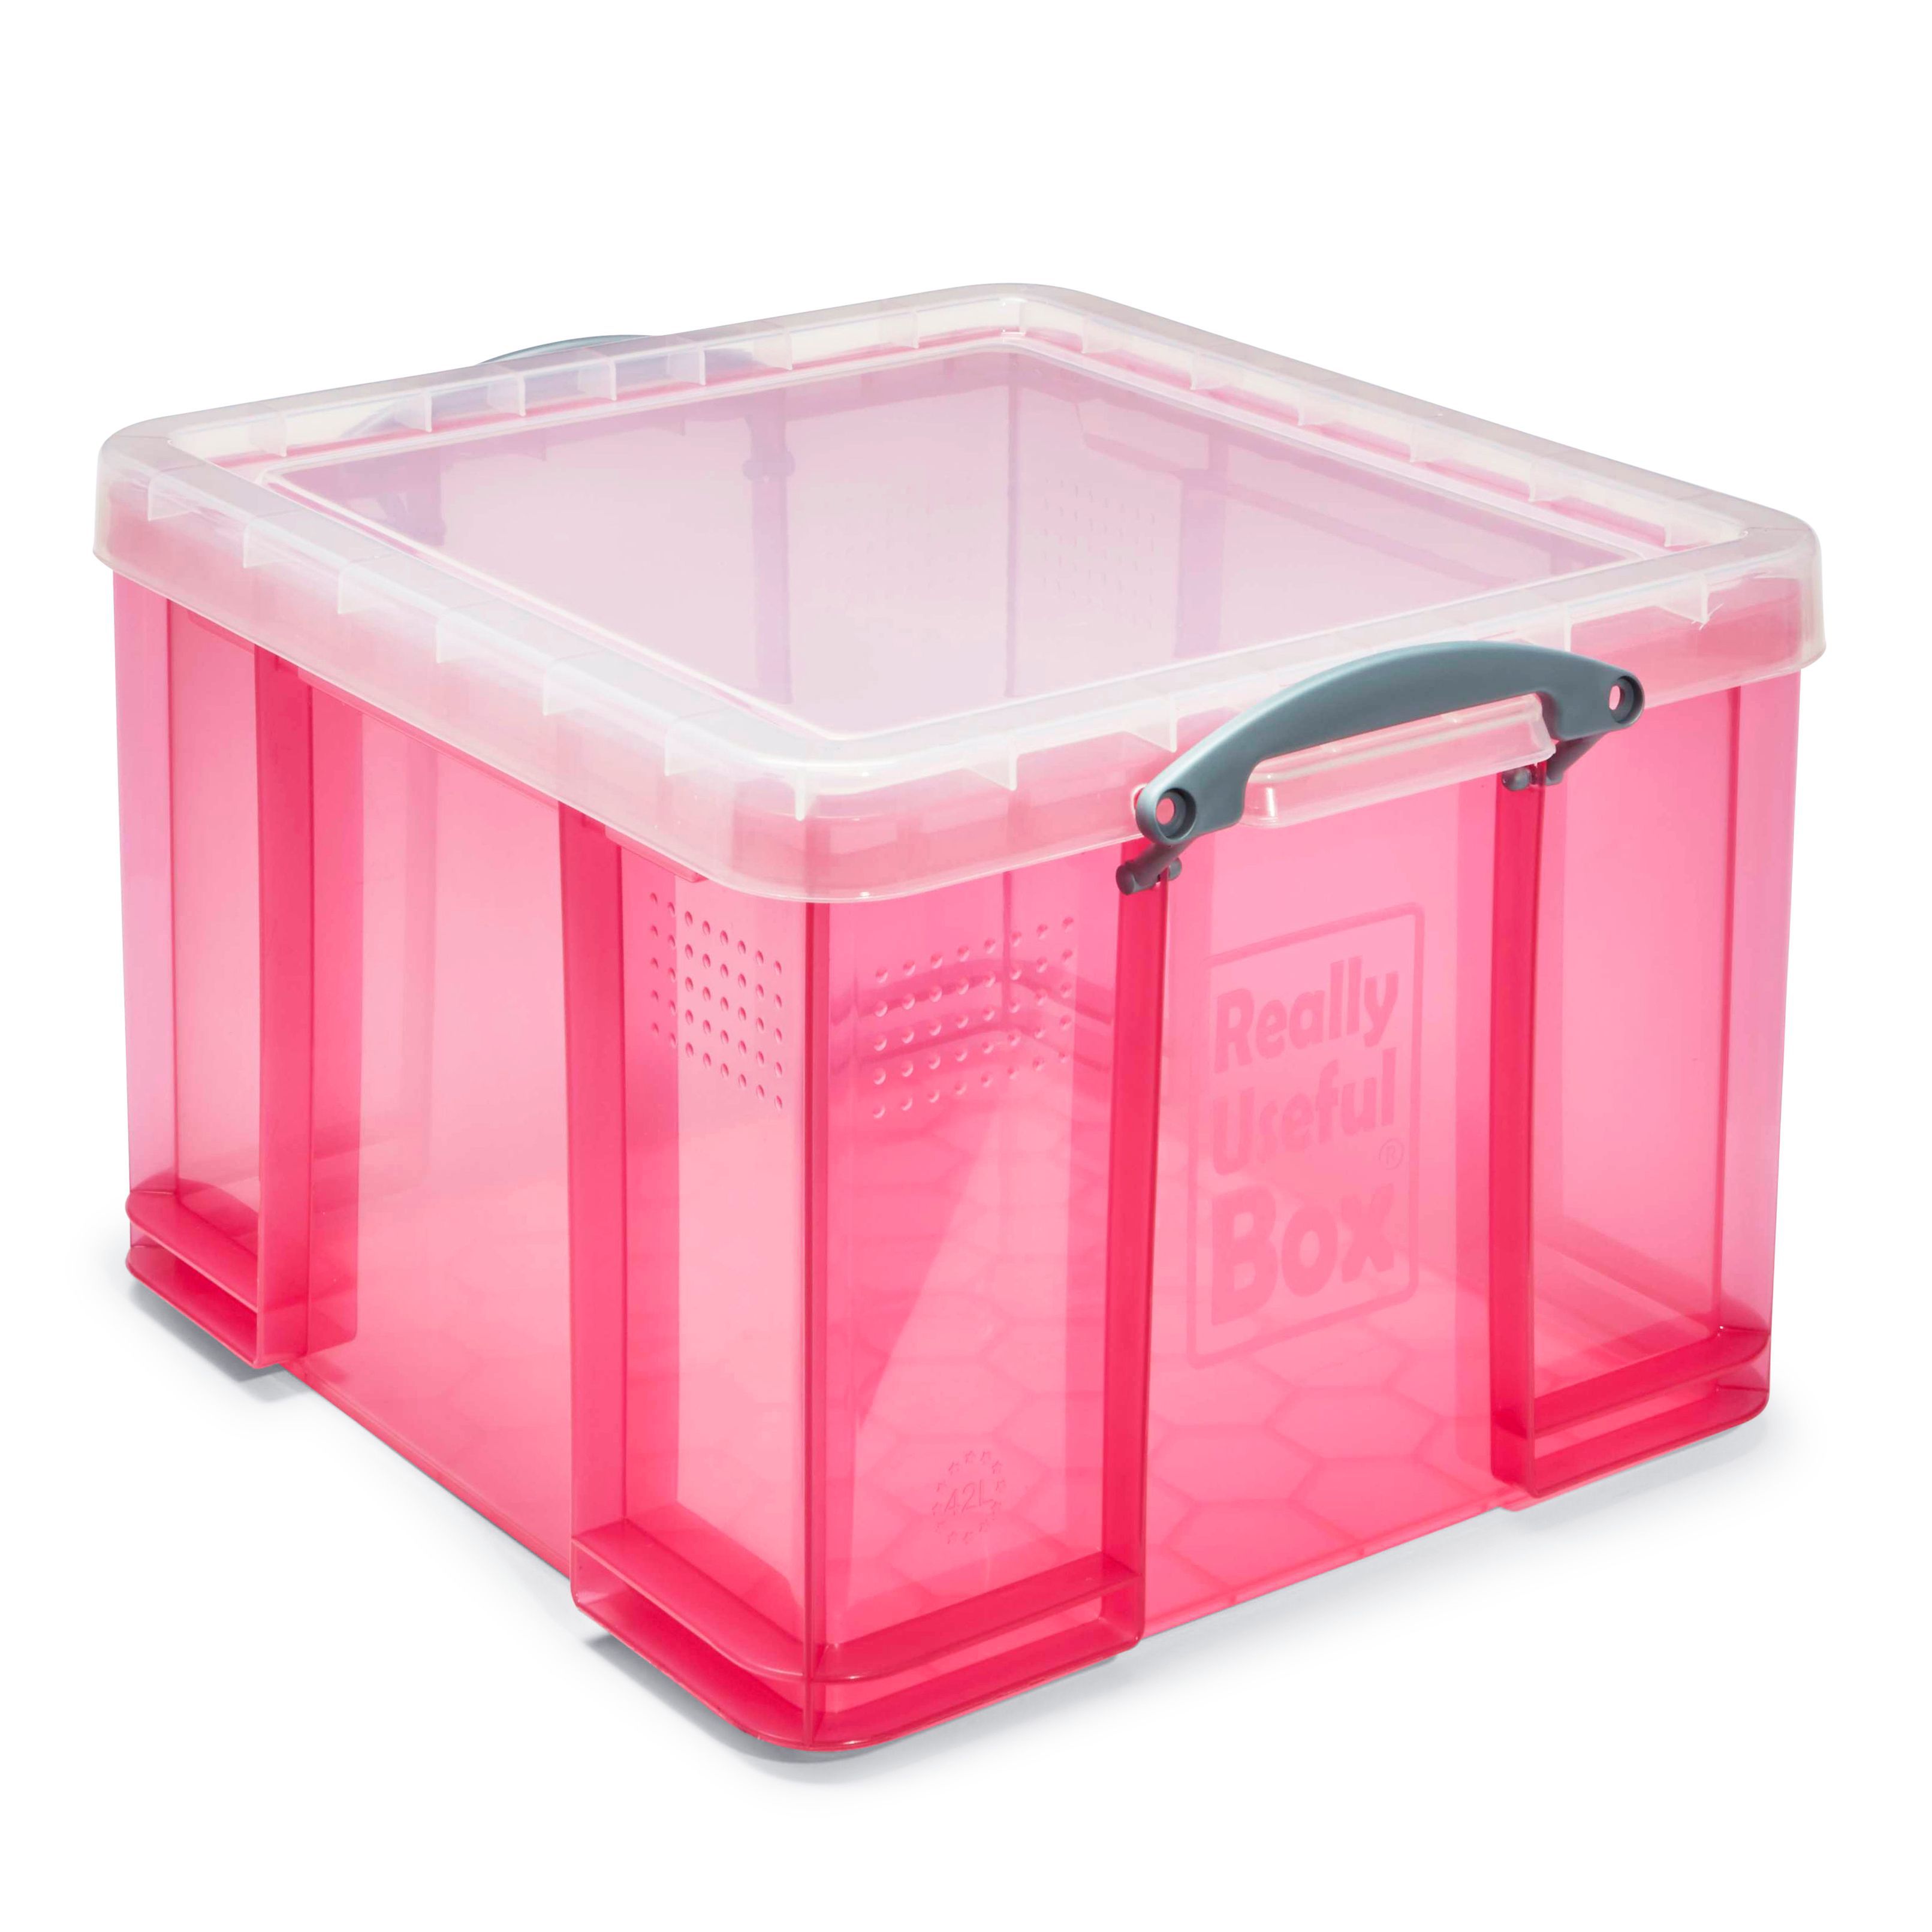 The 42 Litre Really Useful Box is ideal for a number of storage